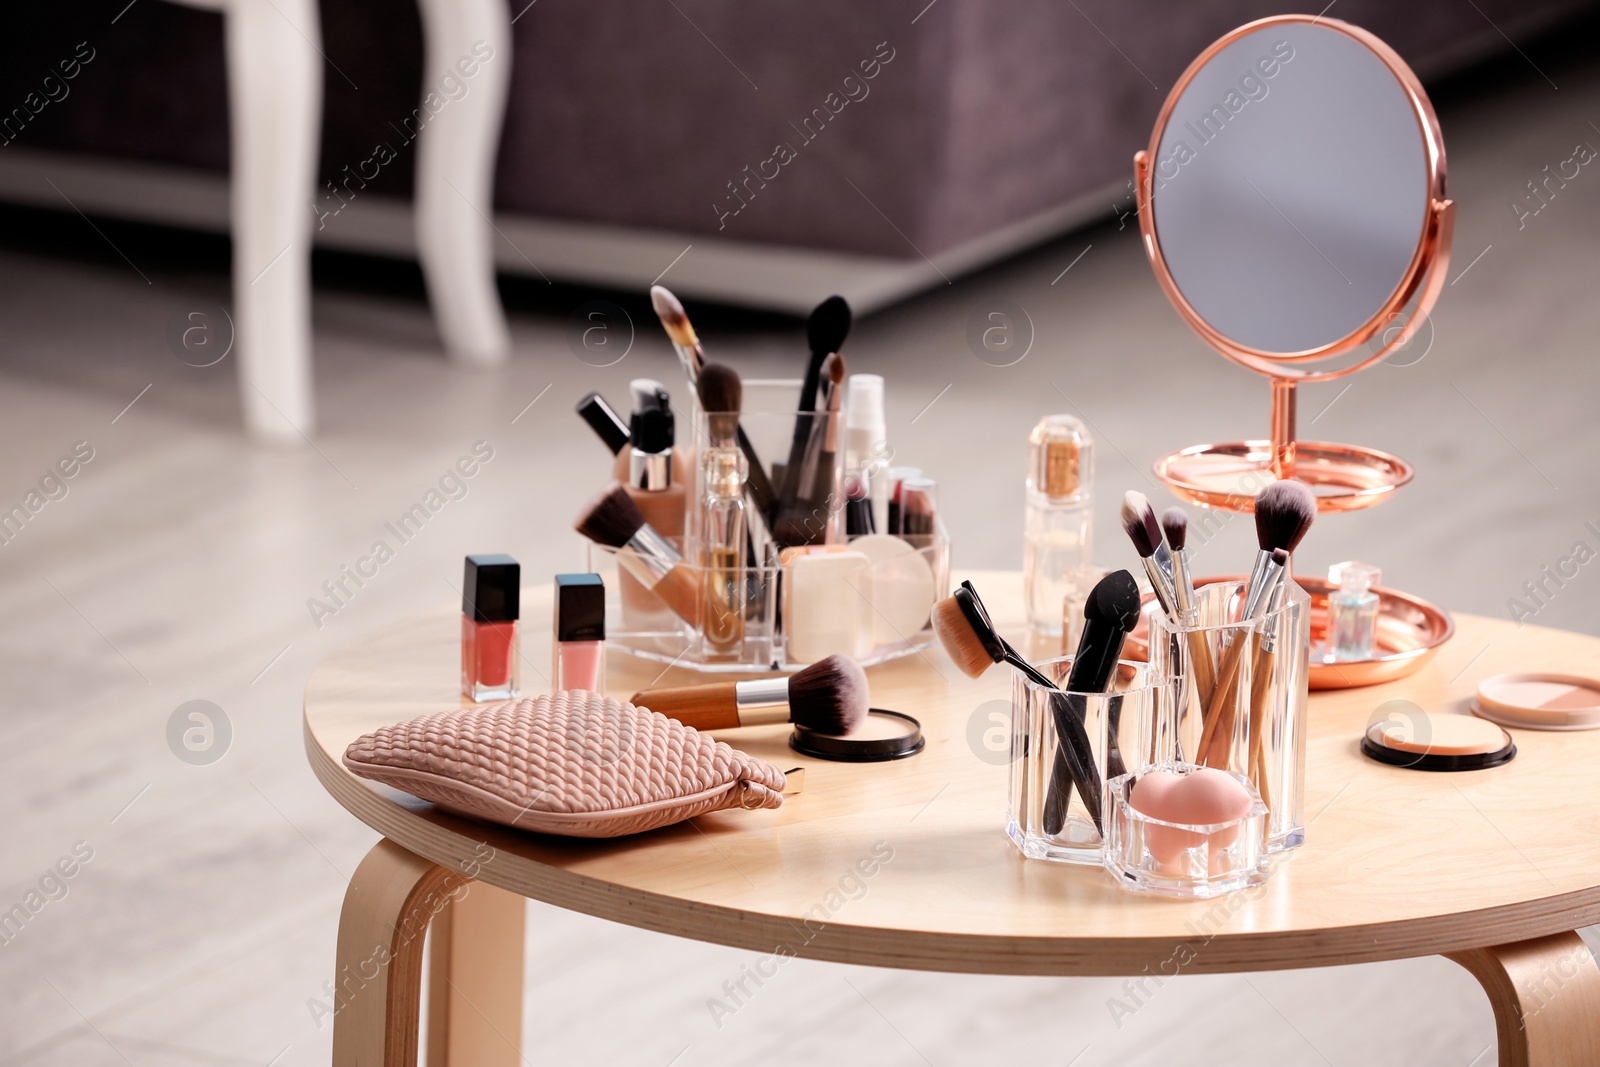 Photo of Makeup accessories and cosmetic products on table against blurred background